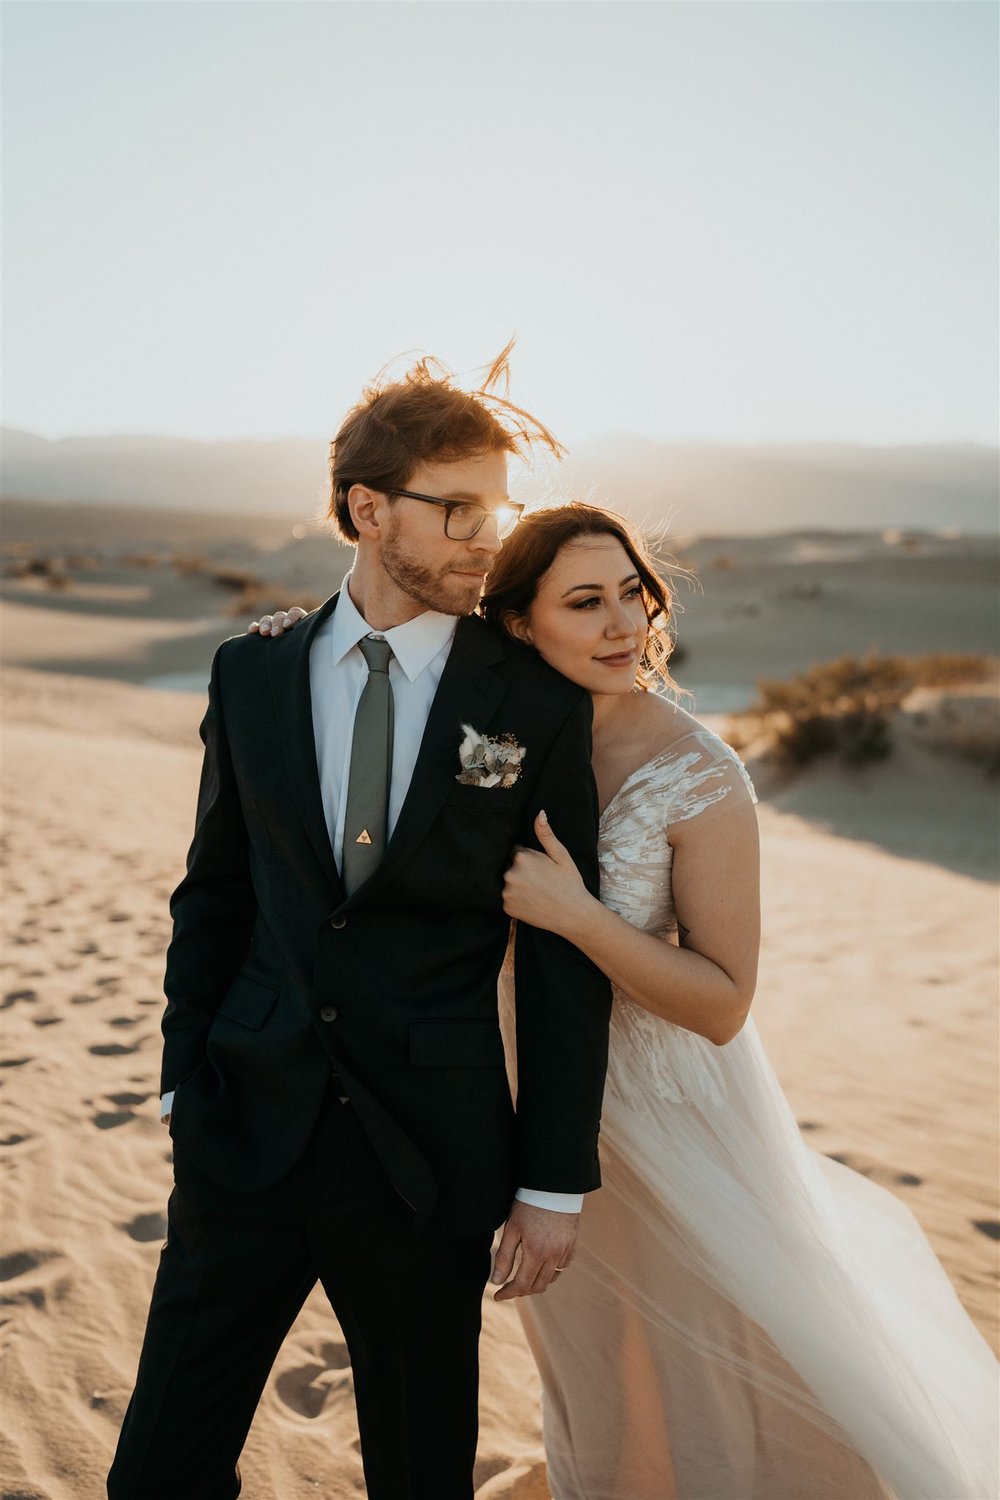 Bride and groom elopement photos in Death Valley National Park